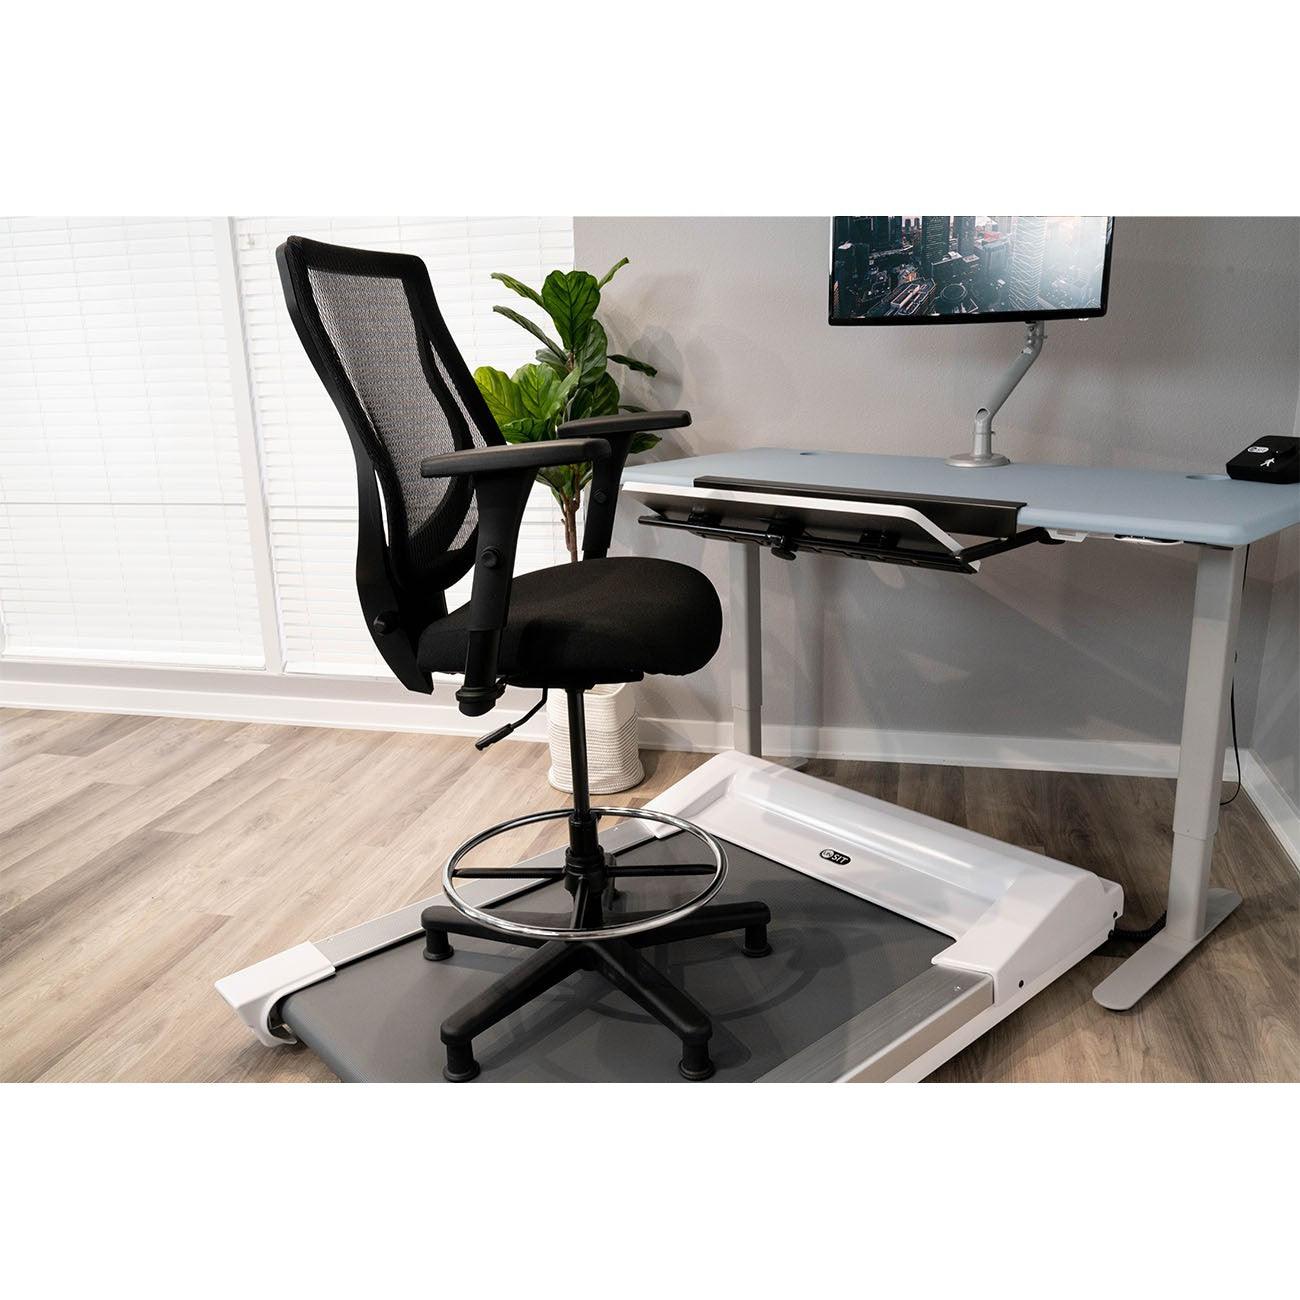 McHale TreadTop StableChair on the Unsit Office Treadmill, Right View